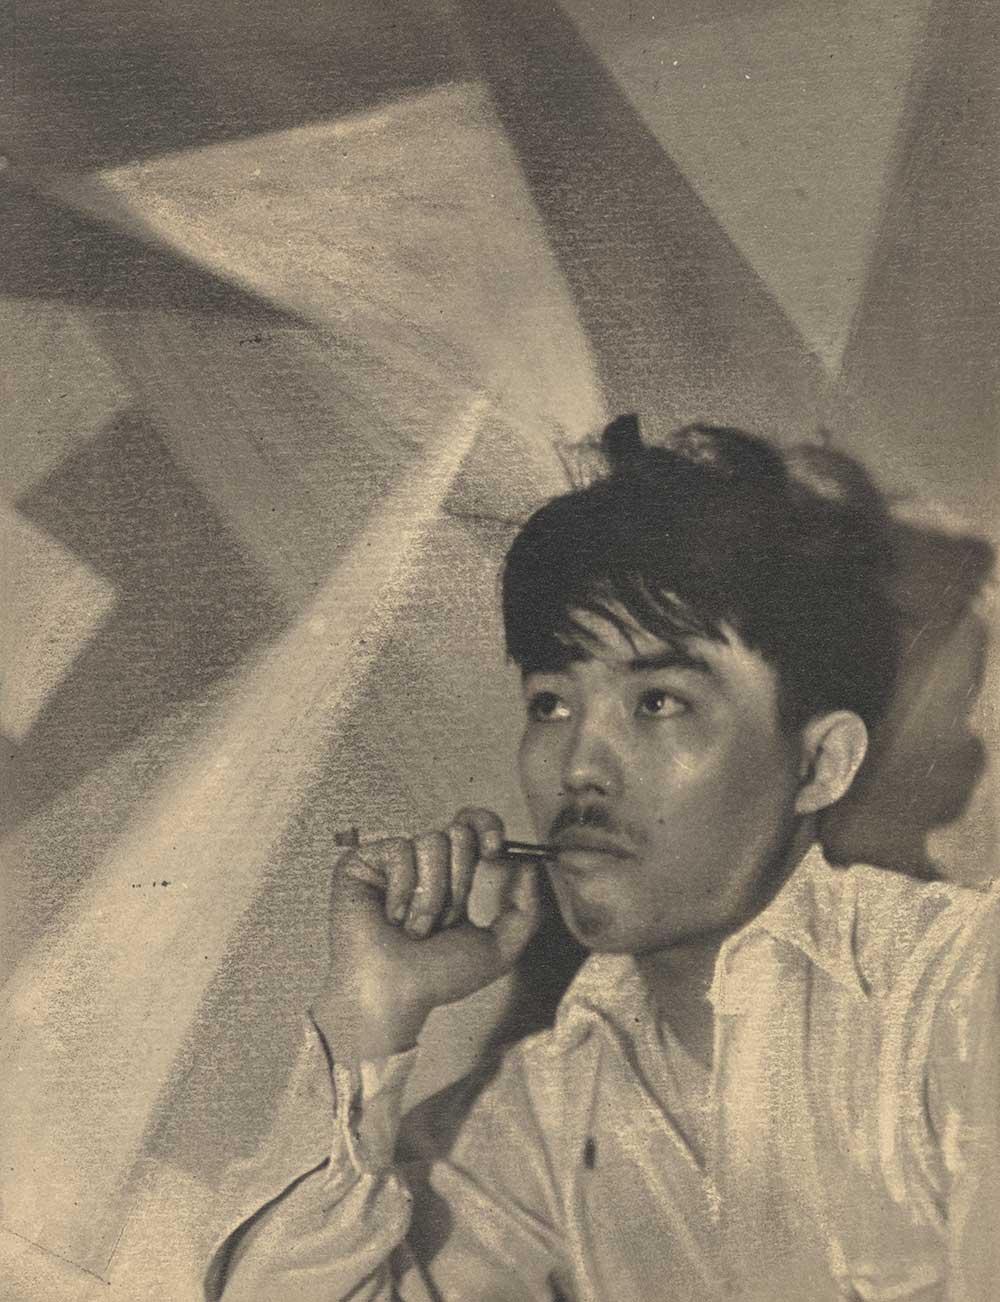 Photograph of a man with dark hair and a thin mustache smoking a cigarette in a holder. There is an abstract geometric background.